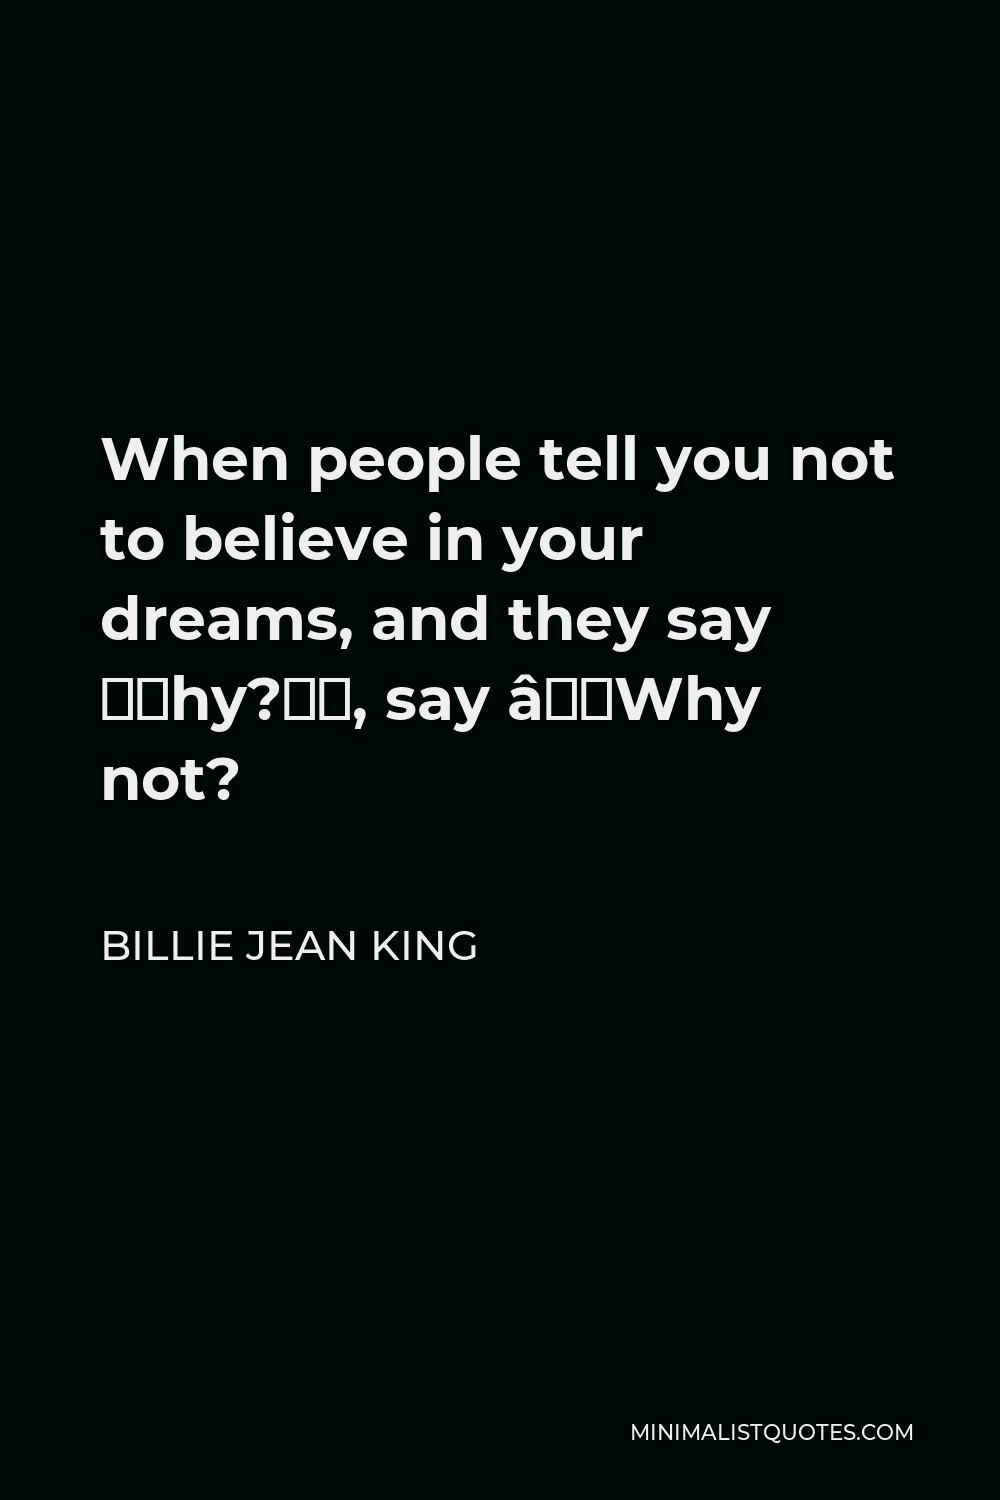 Billie Jean King Quote - When people tell you not to believe in your dreams, and they say “Why?”, say “Why not?